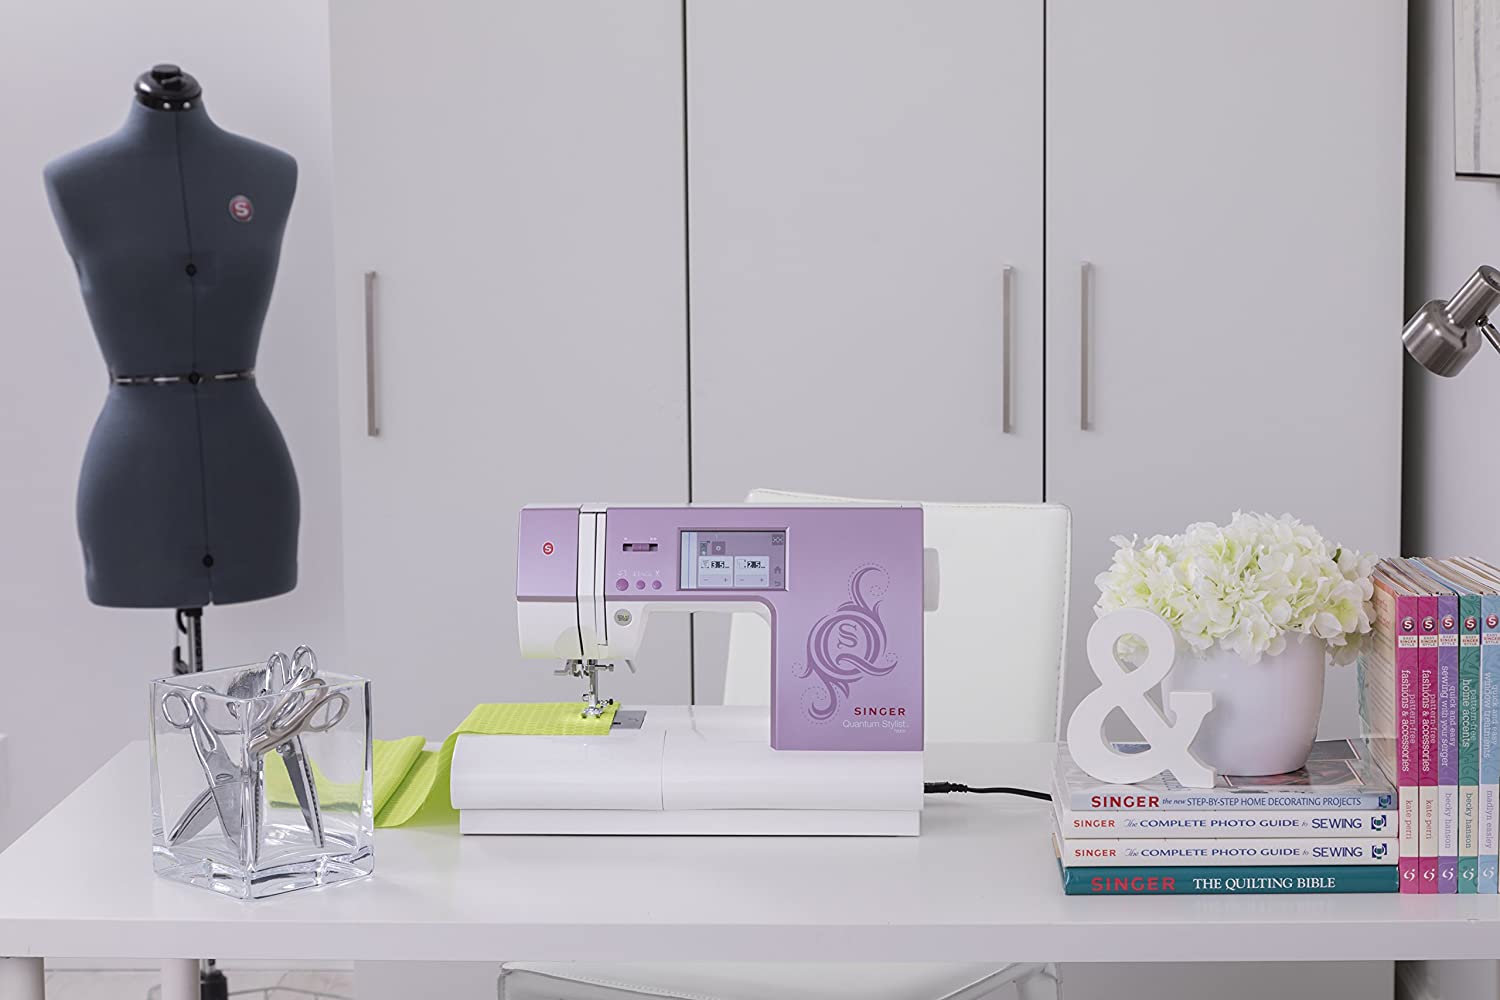 Singer 9985 Quantum Stylist™ Sewing Machine for Sale at World Weidner